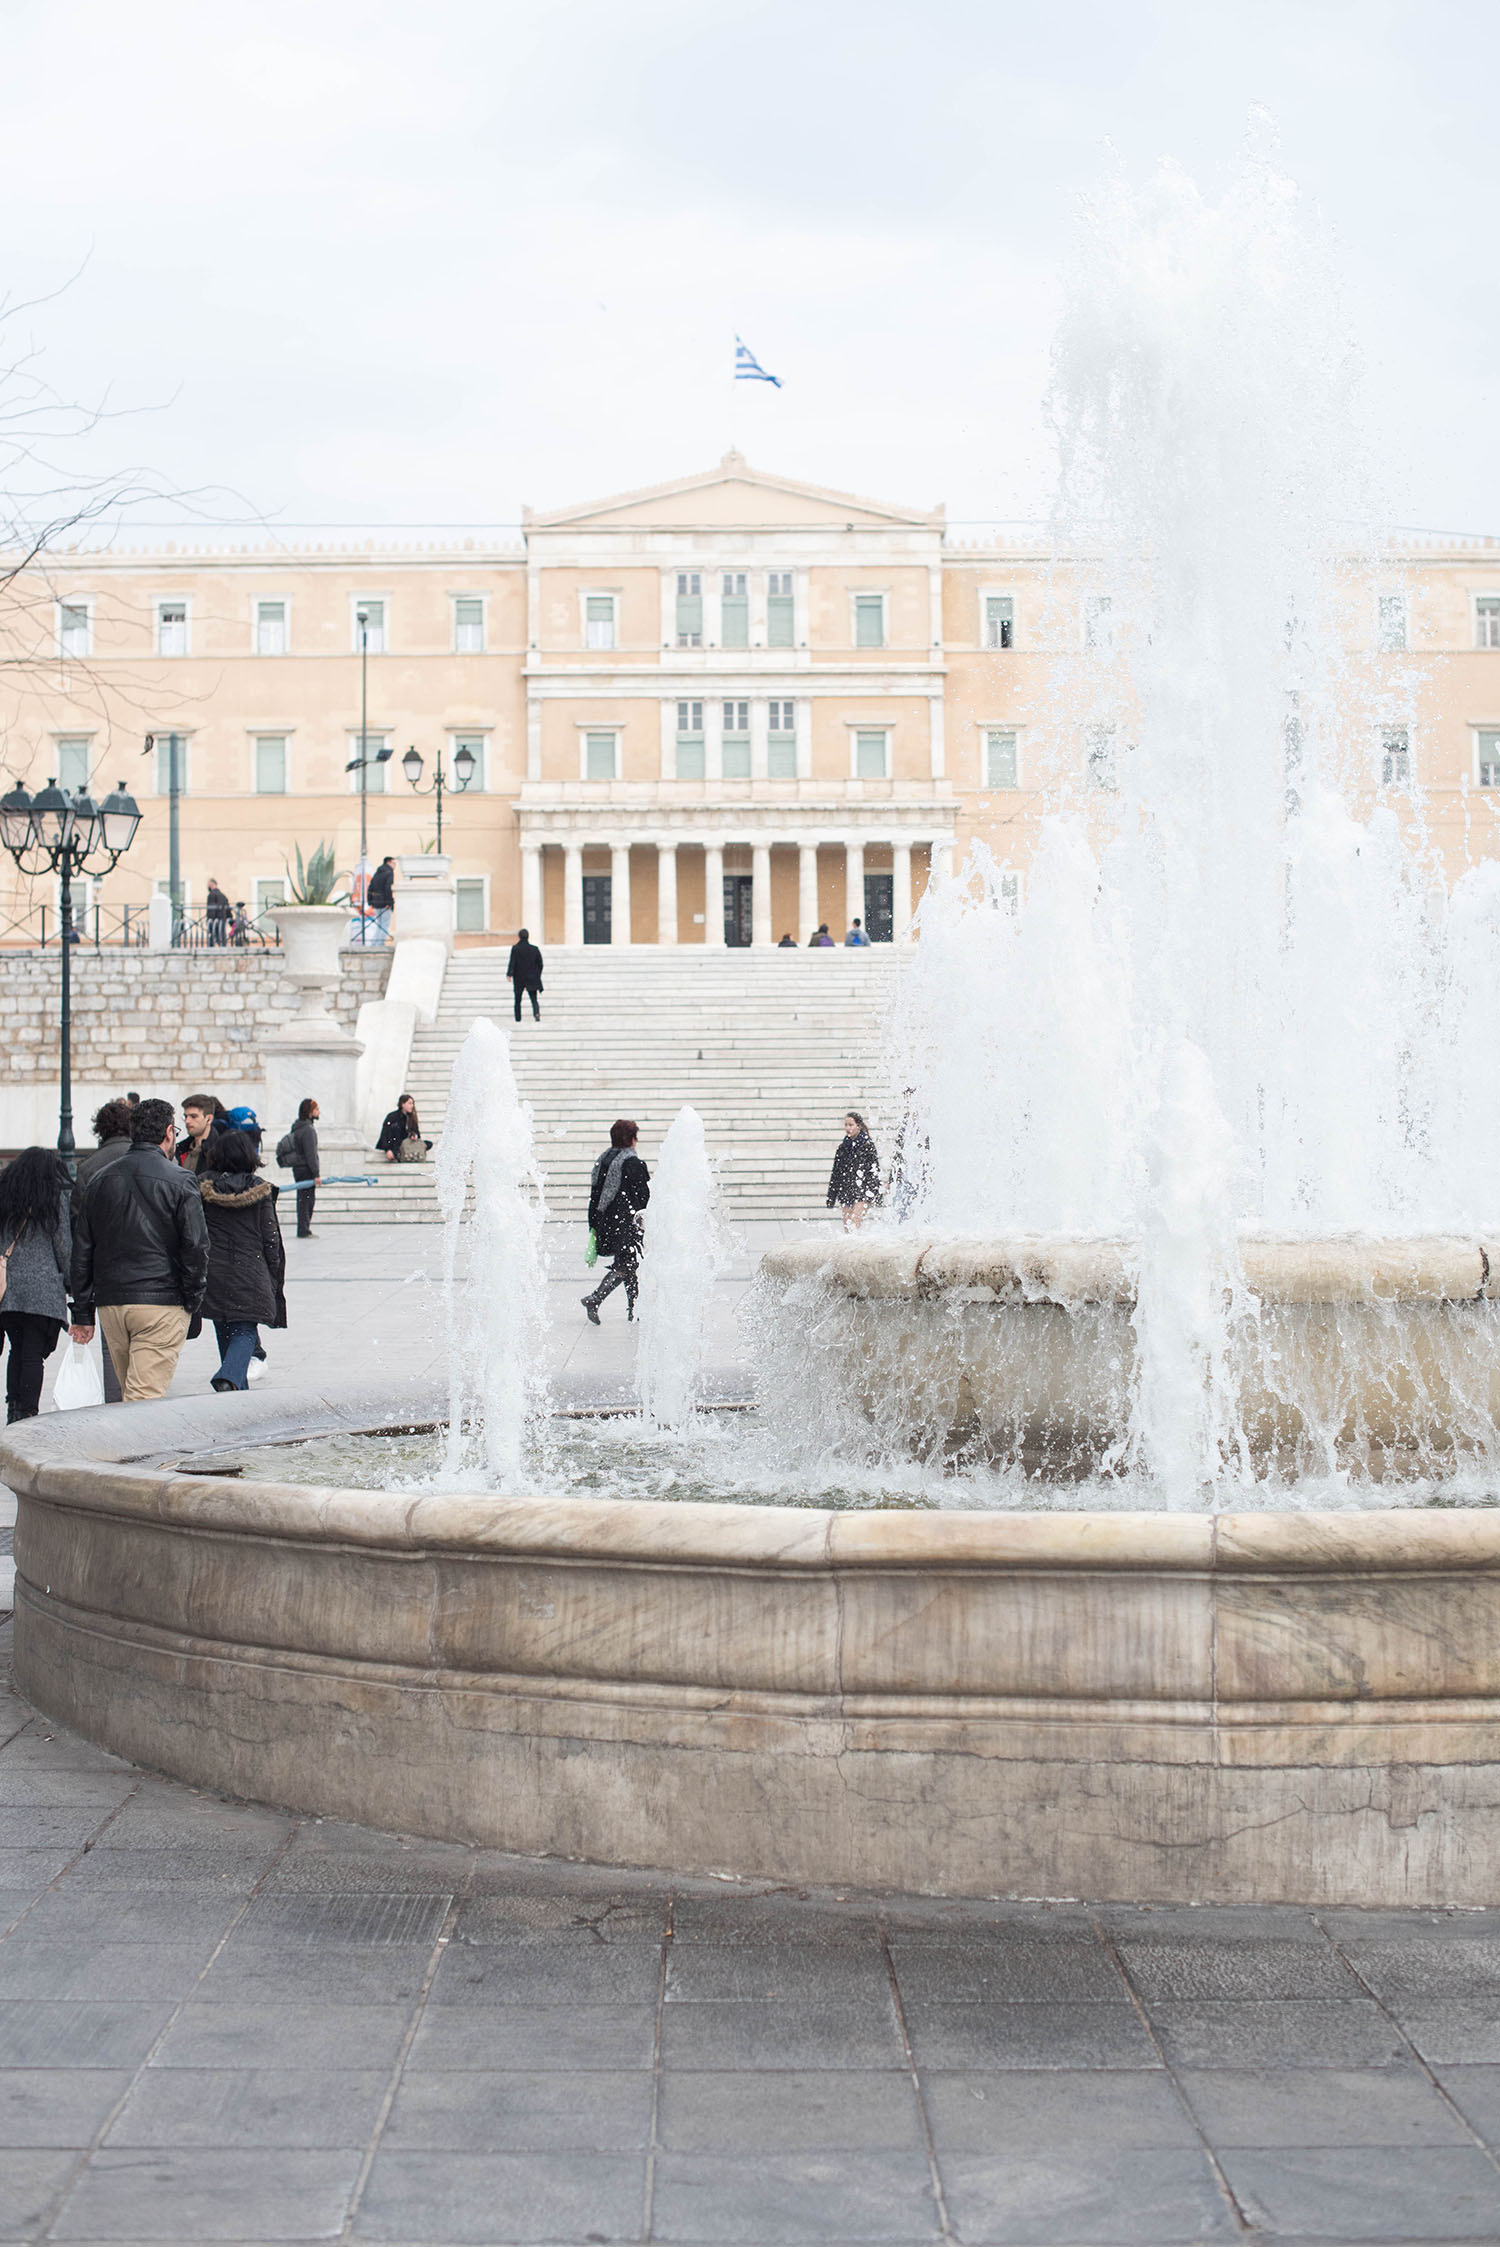 The University of Athens seen through the fountain at Syntagma Square in the Greek capital, as captured by travel blogger Cee Fardoe of Coco & Vera